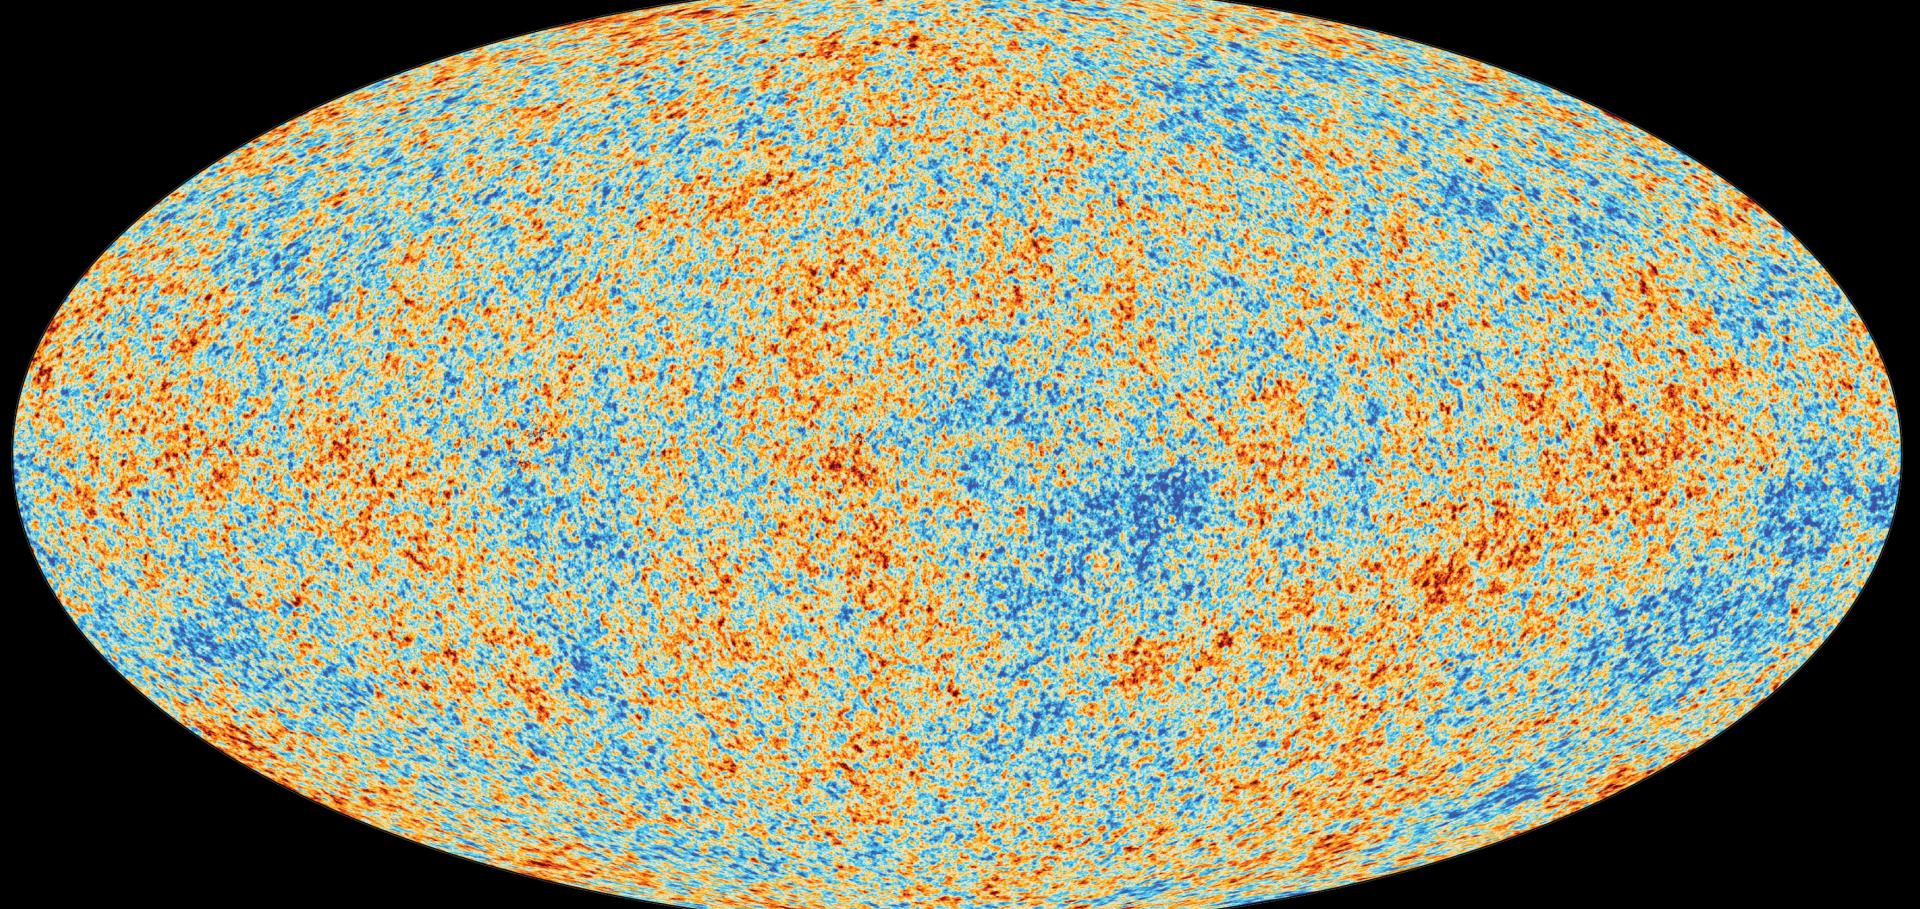 A map of the CMB sky from the Planck Satellite